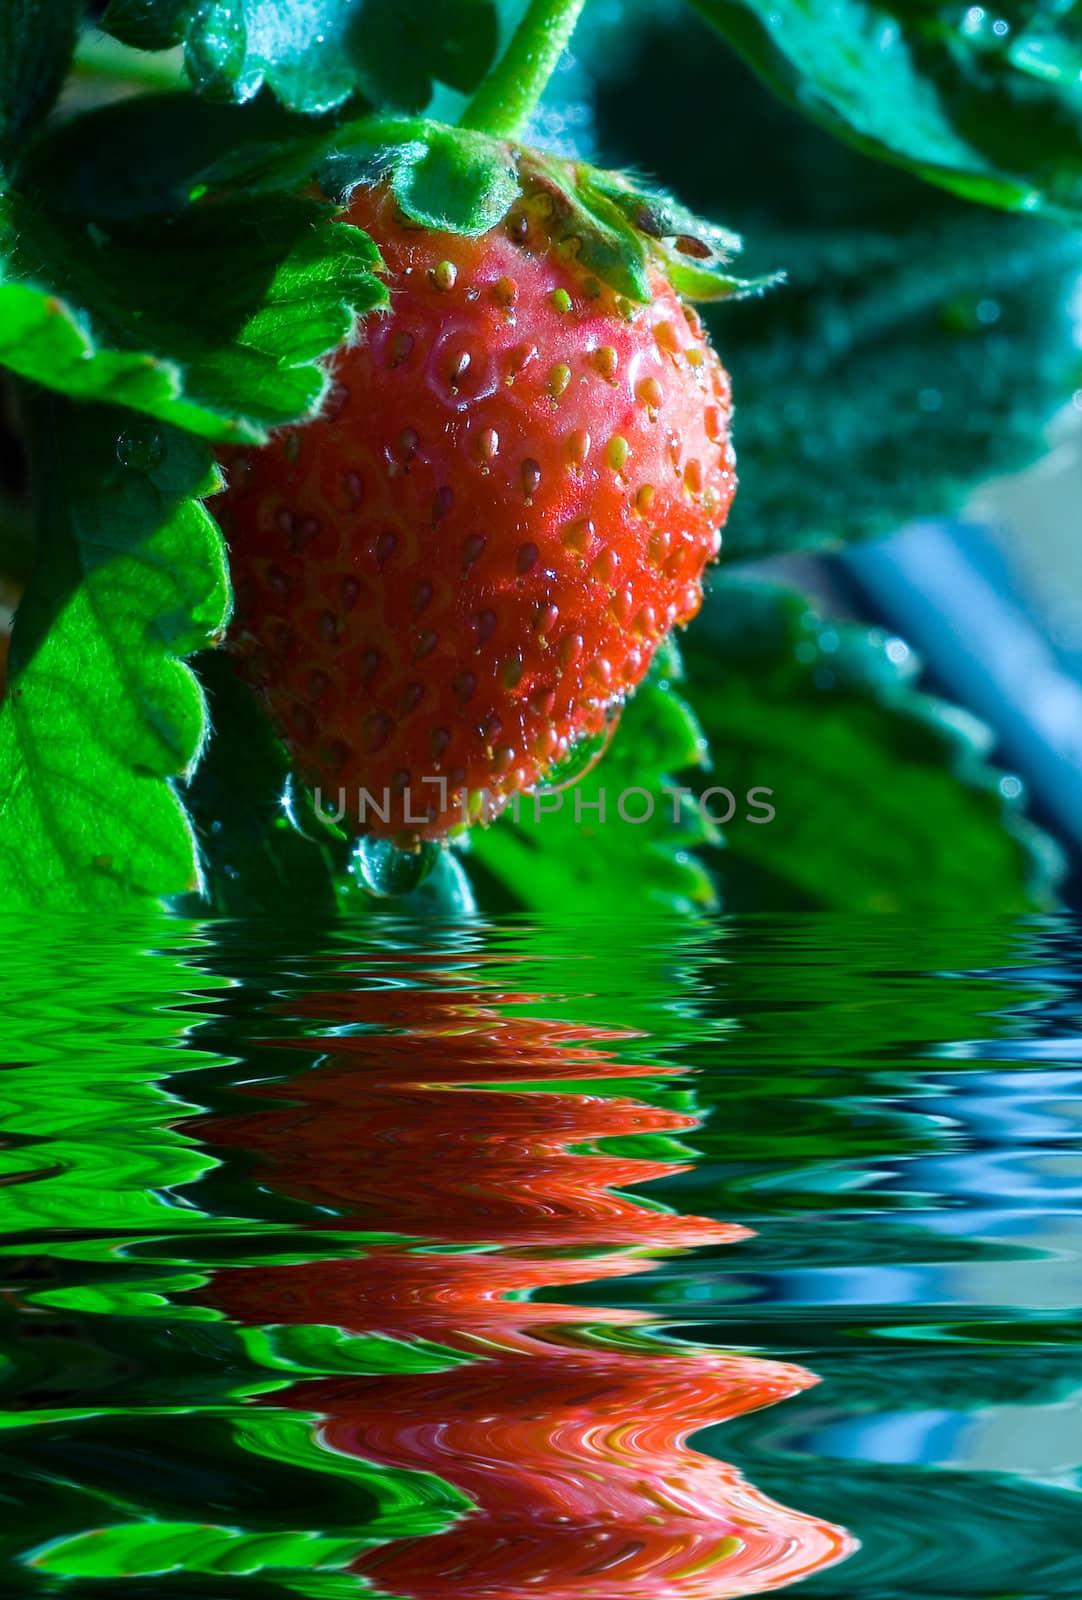 Thrickets of a strawberry.Photo with a bright red berry. Reflex.Water